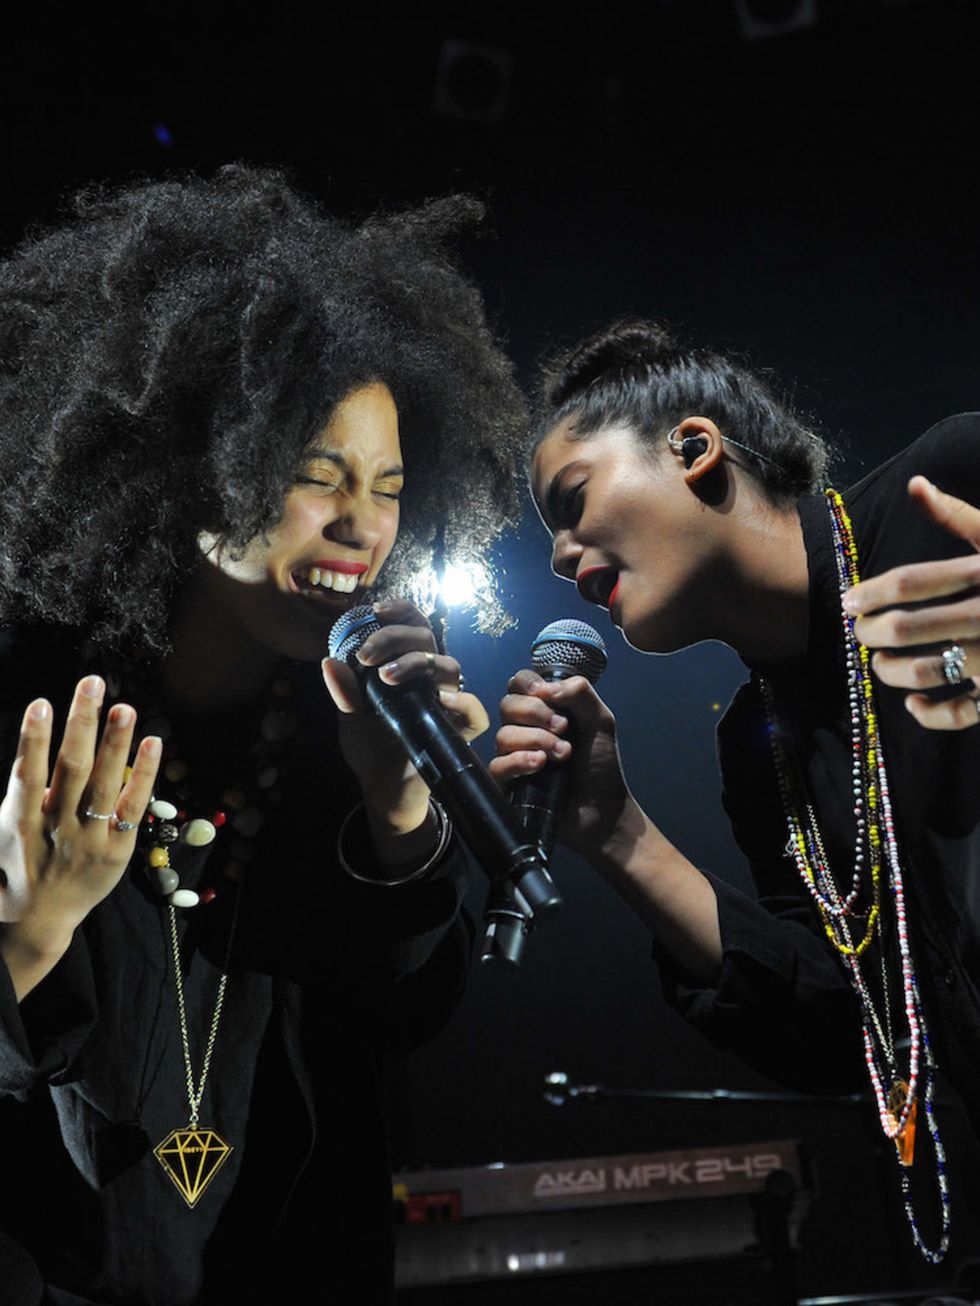 <p><strong>Ibeyi </strong></p>

<p>Band of the moment Ibeyi is made up of French-Cuban twin sisters Naomi and Lisa-Kiande Diaz. Daughters of the late Cuban percussionist Anga Diaz, the duos music pays homage to their Cuban heritage, mixing modern pop, hi